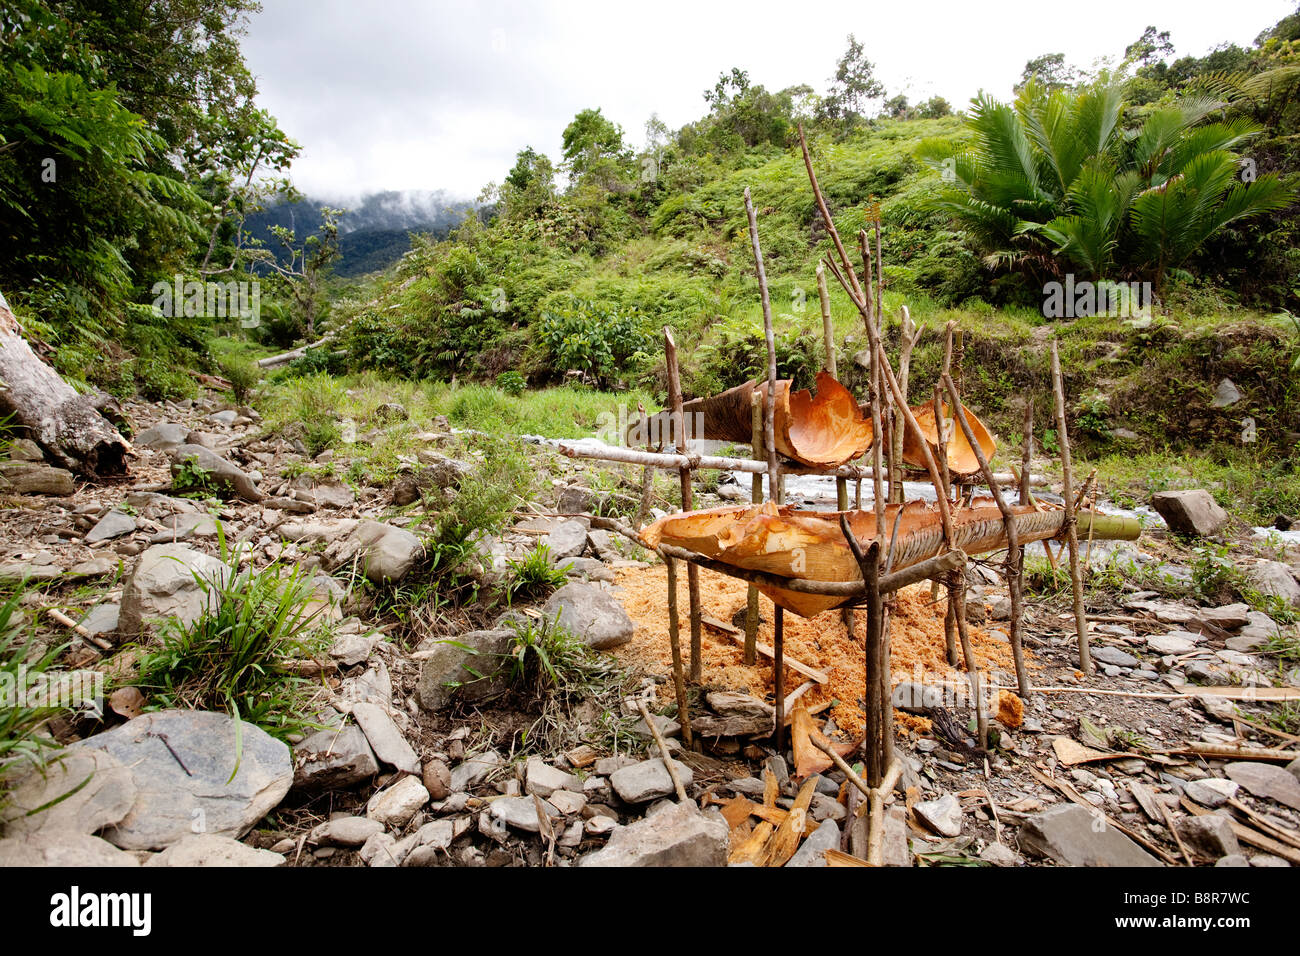 Primative yet usefull tools for making sago a staple food in Papua New Guinea and Indonesia Stock Photo